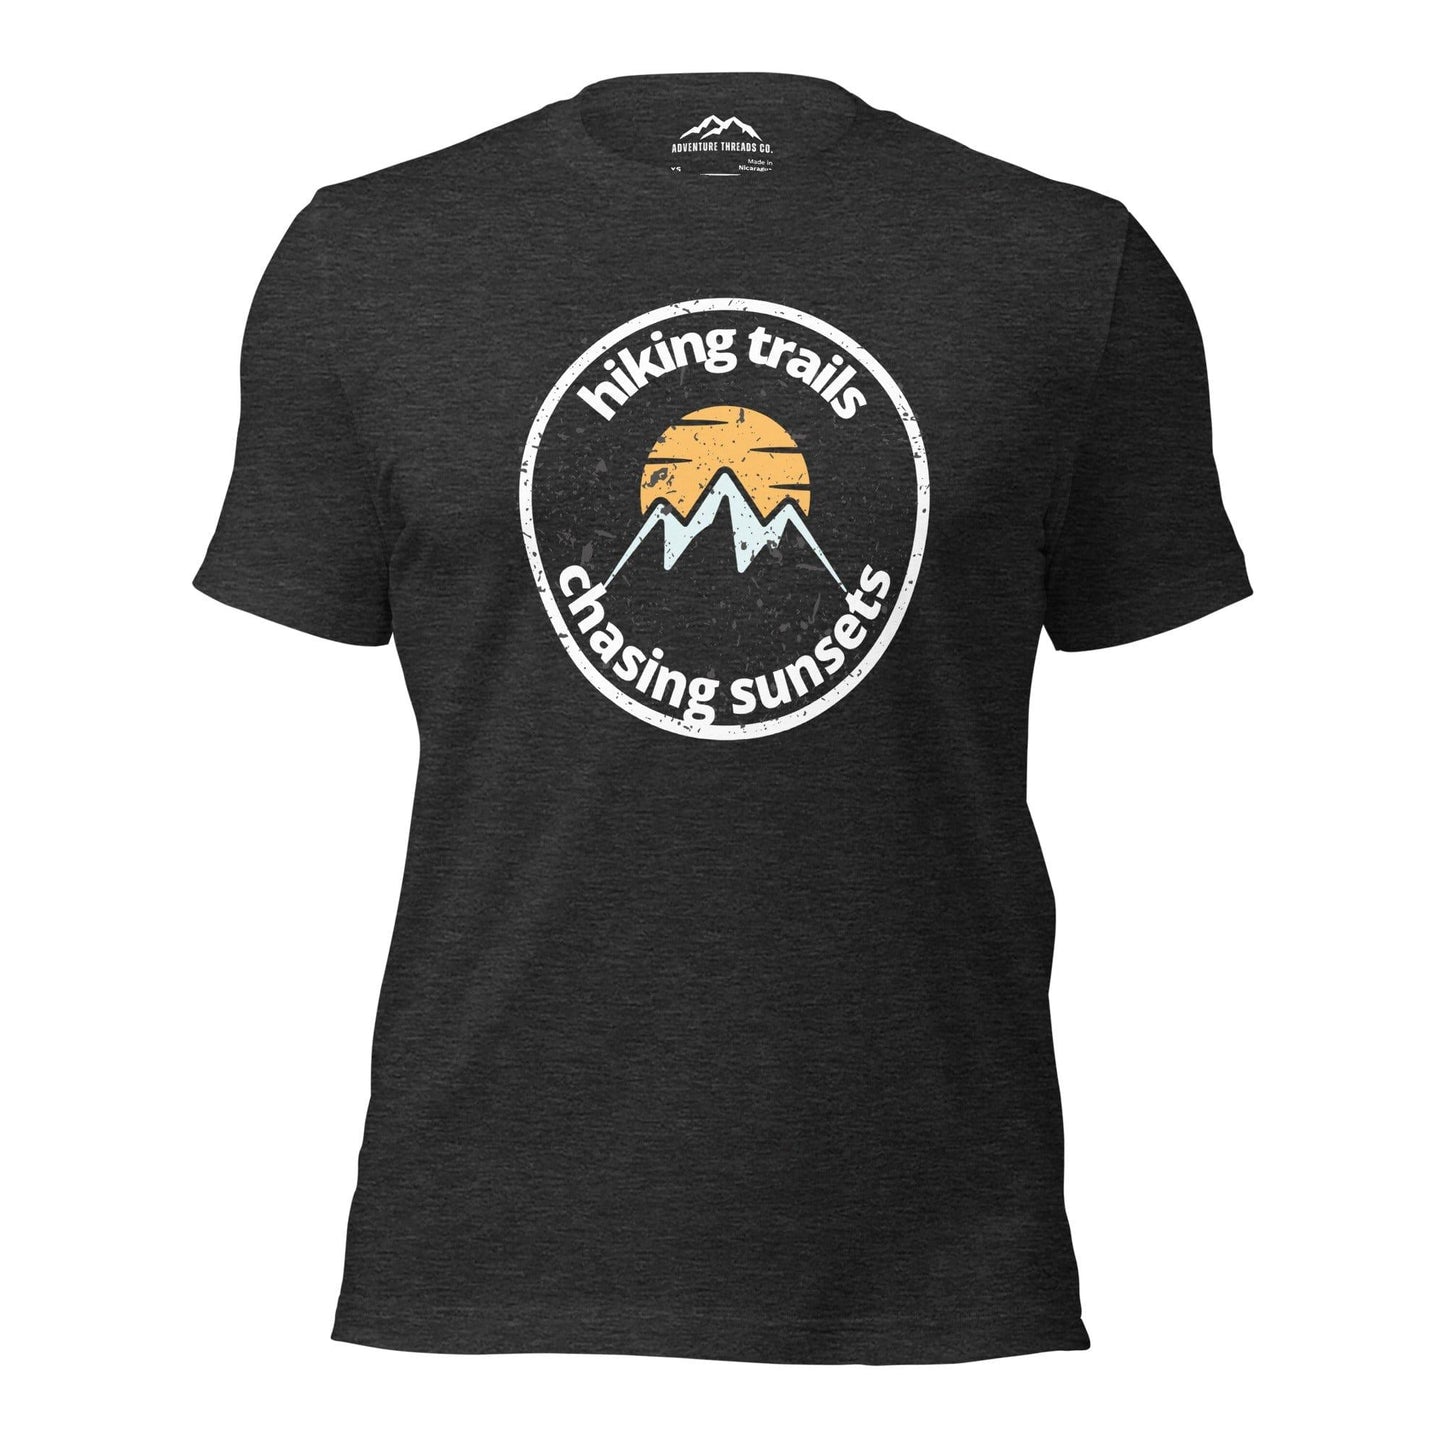 Hiking & Chasing Sunsets T-Shirt - Adventure Threads Company